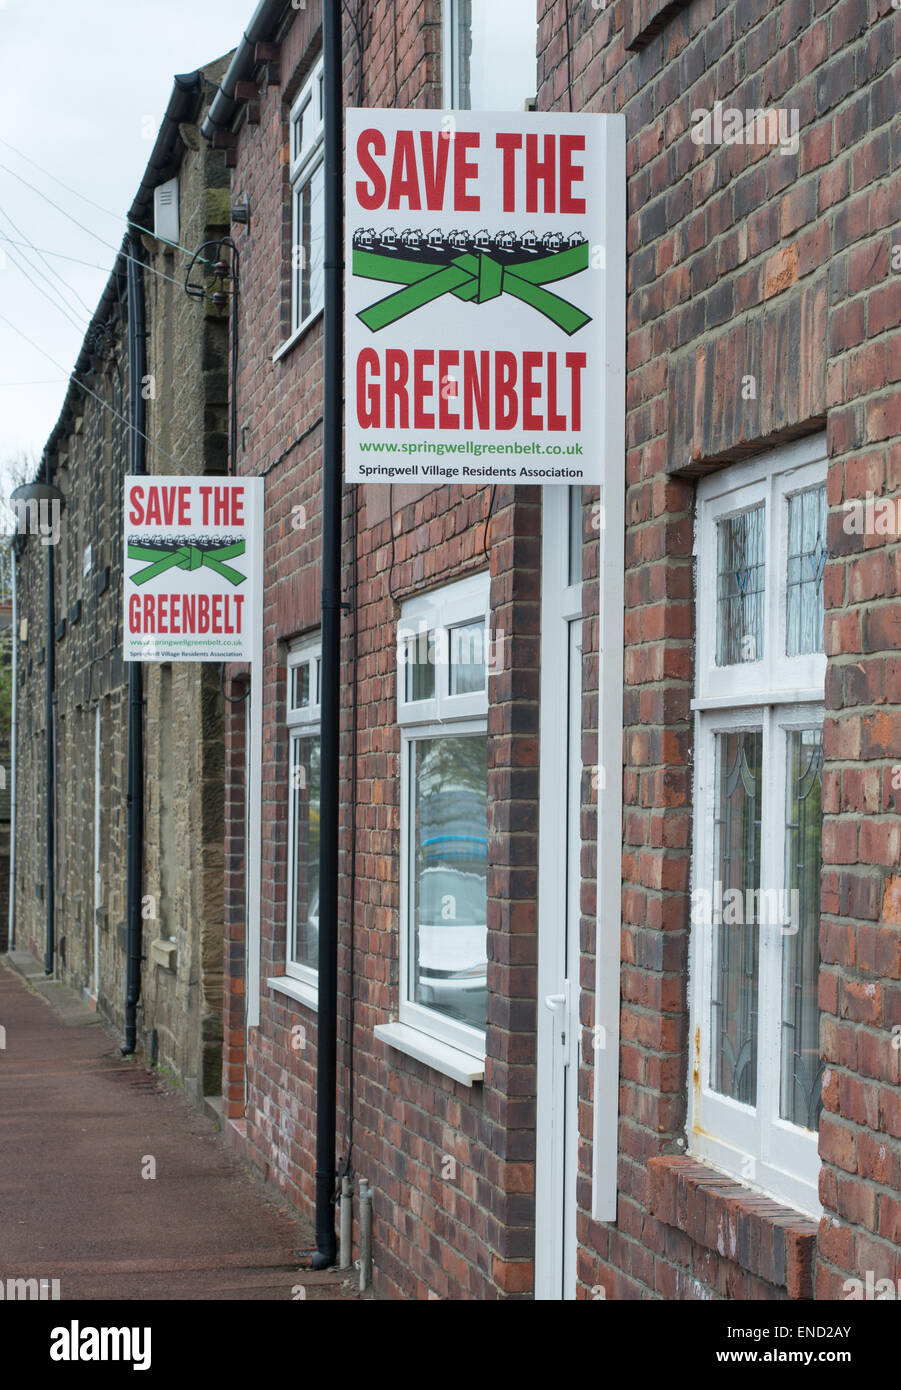 Save the Greenbelt signs, Springwell Village, north east England UK Stock Photo